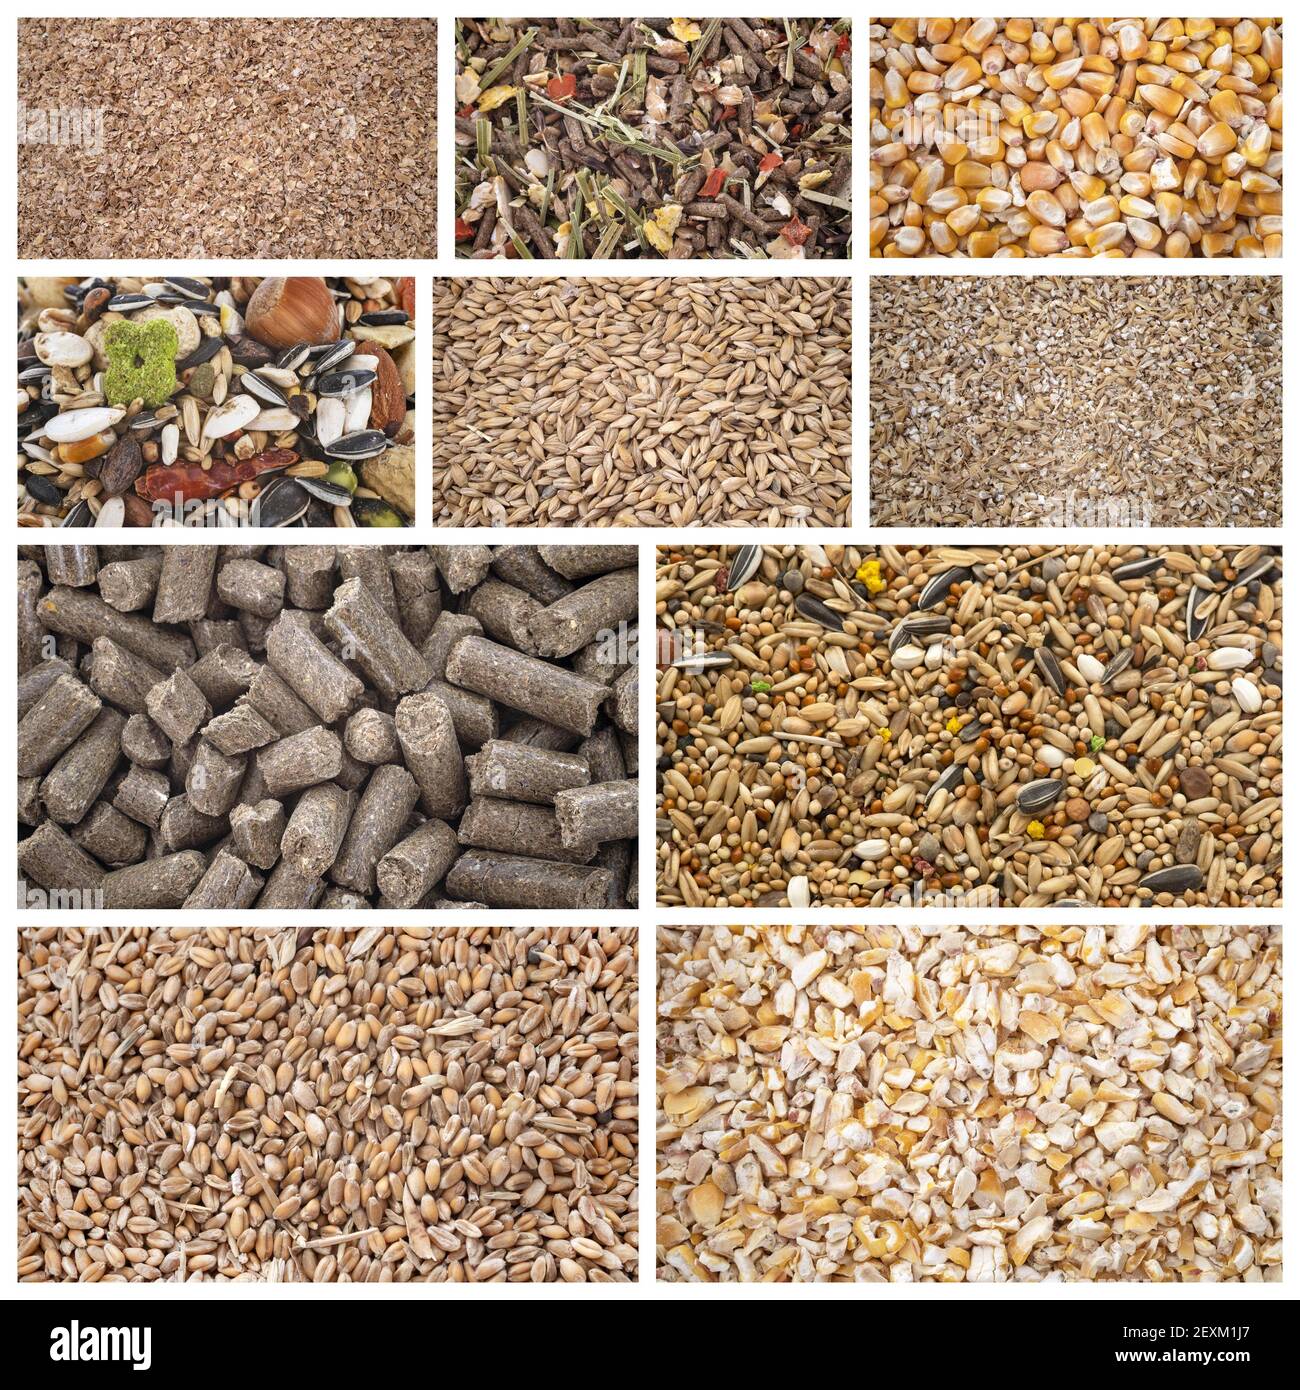 composite picture of cereals for animal food Stock Photo